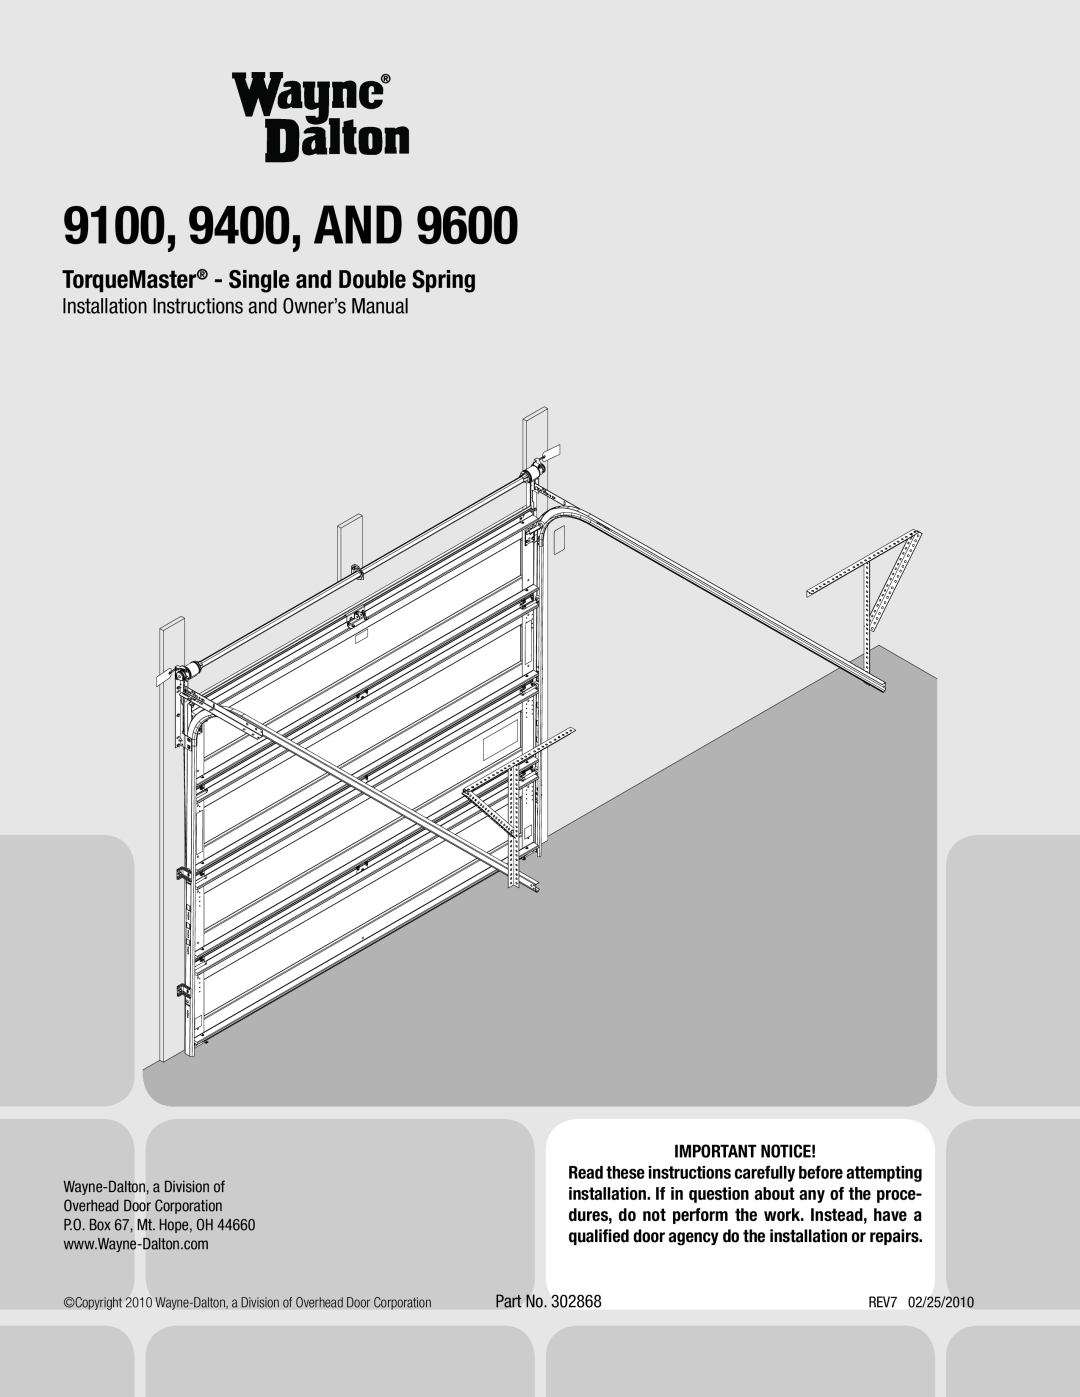 Wayne-Dalton installation instructions 9100, 9400 and 9600 Series, TorqueMaster Plus - Single and Double Spring 